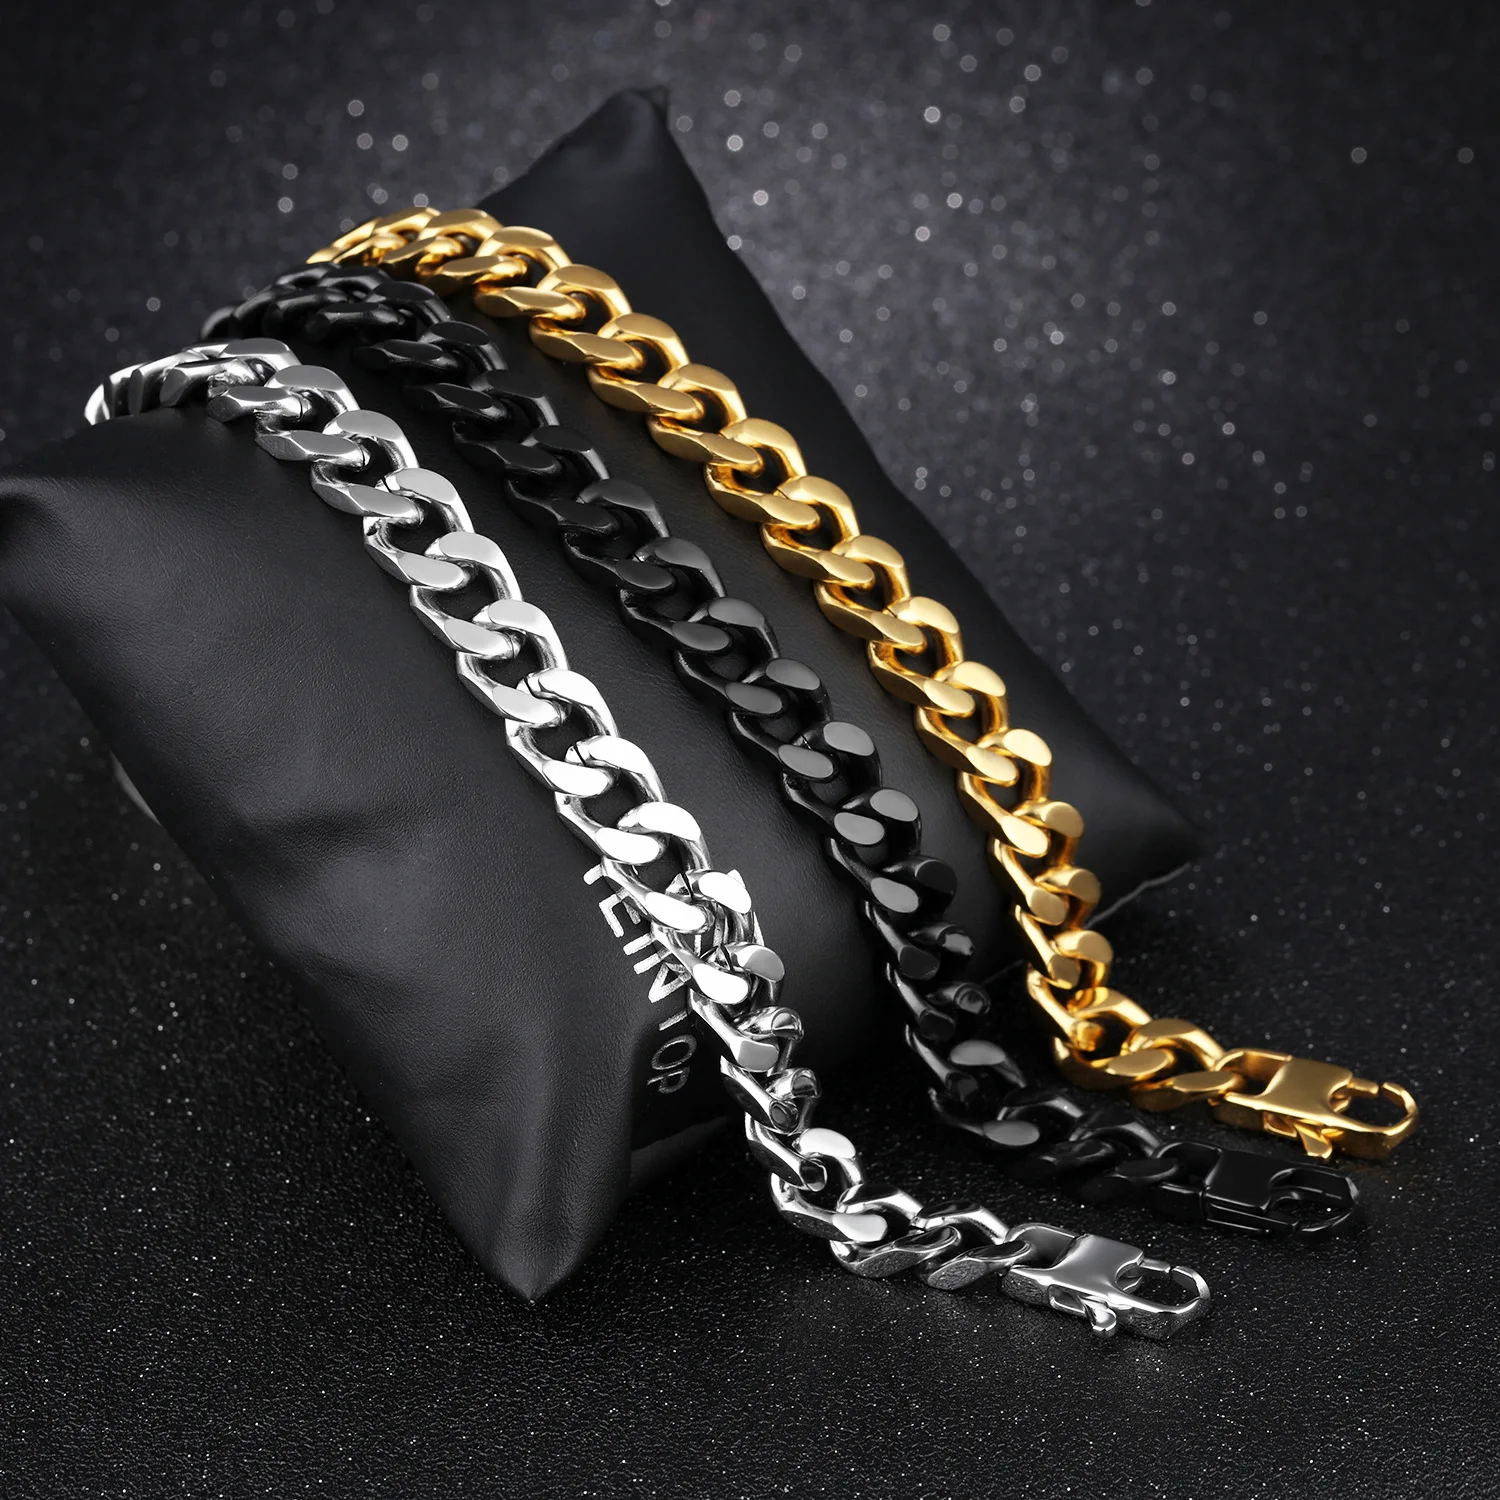 

HONGTONG Jewelry Wholesale Amazon Hot Selling Gold-Plated Stainless Steel Thick Snake Bone Chain Classic Men's Bracelet, Picture shows